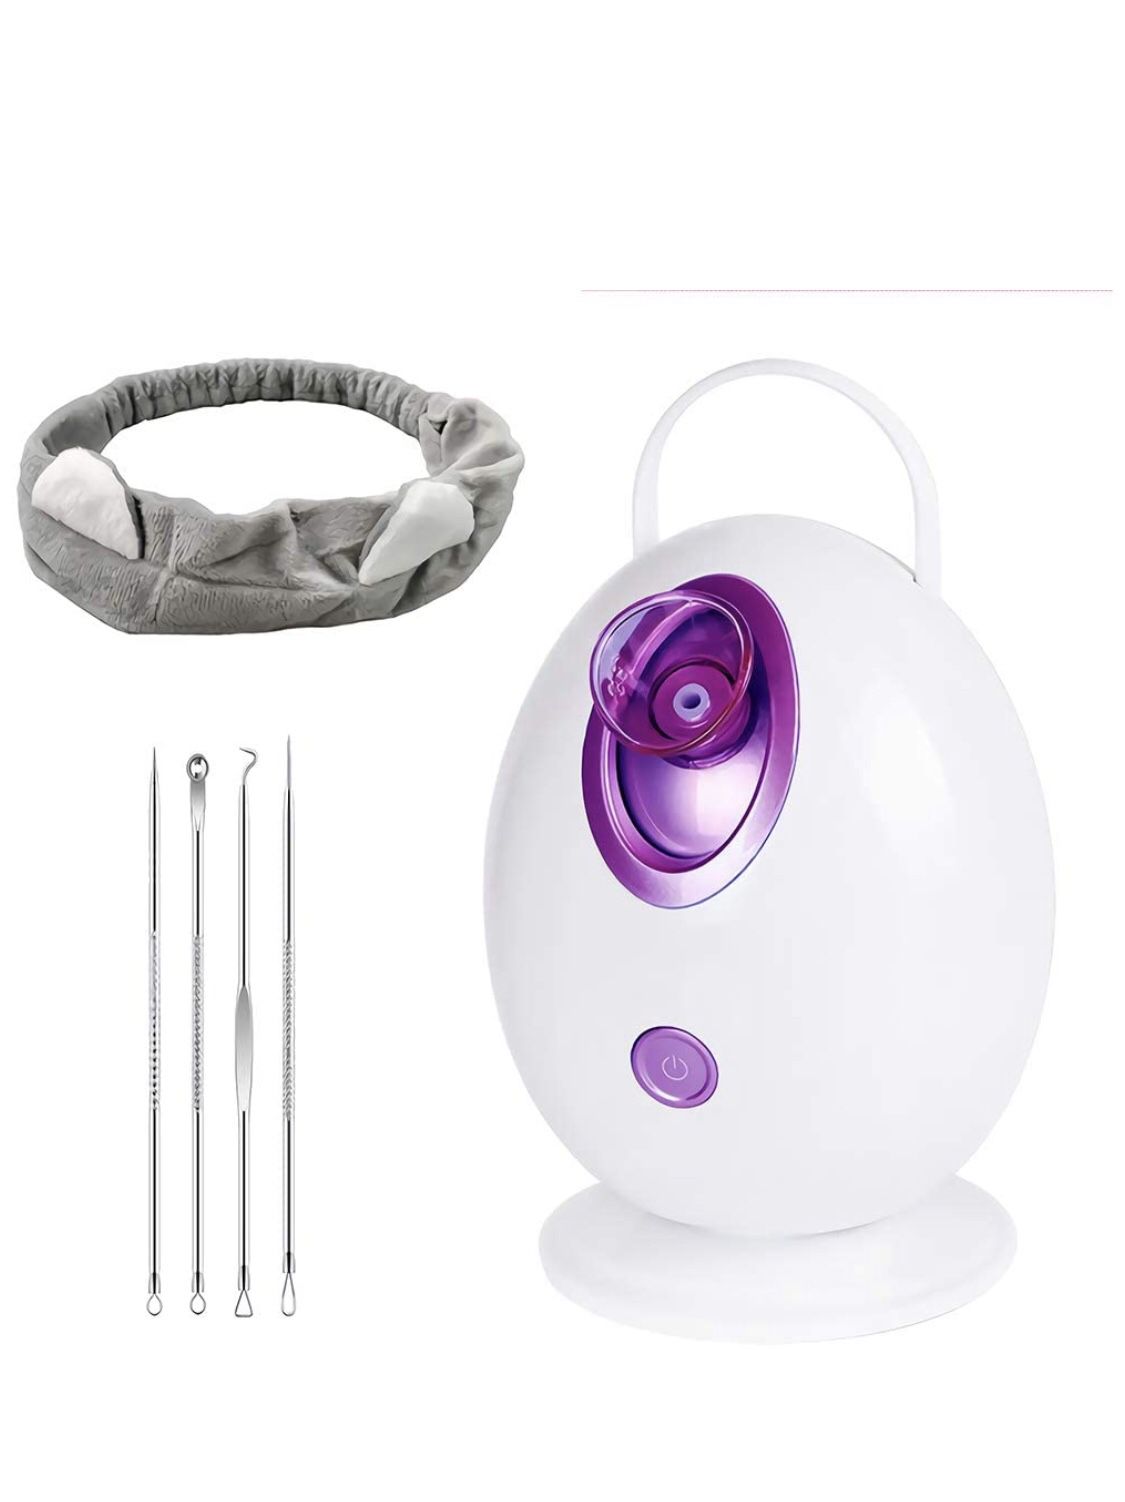 YIVIYAR 4 in 1 Nano Ionic Facial Steamer, Warm Mist Face Humidifier, Sauna Home SPA Quality Facial Steamer for Women with Free 4 Pieces Blackhead Rem